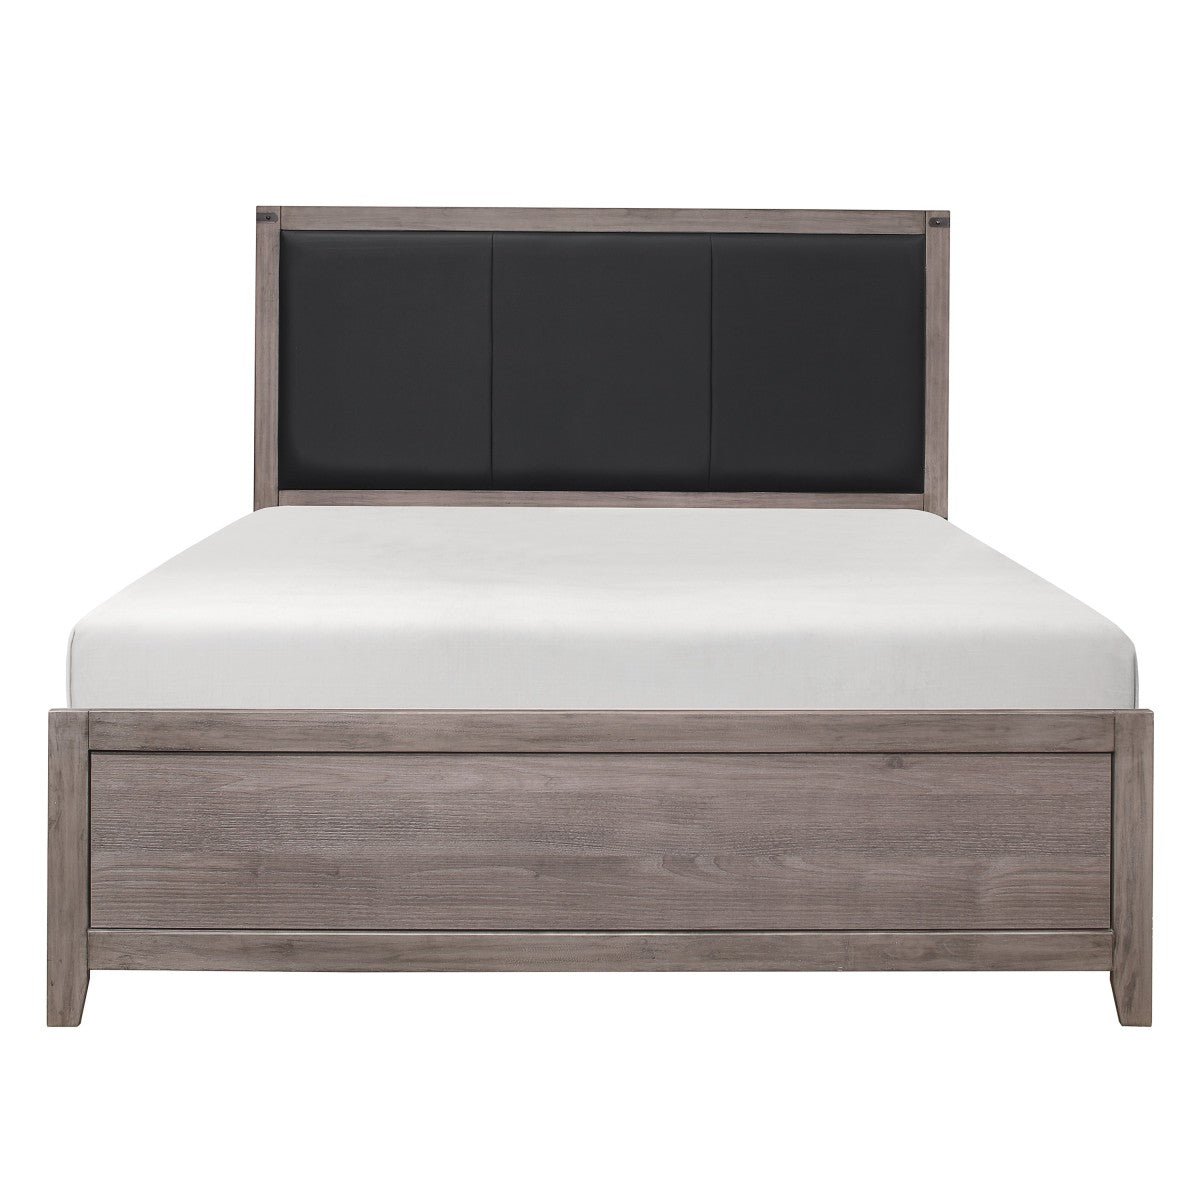 Woodrow Black Contemporary Melamine Board Engineered Wood Faux Leather Upholstered Queen Panel Bed